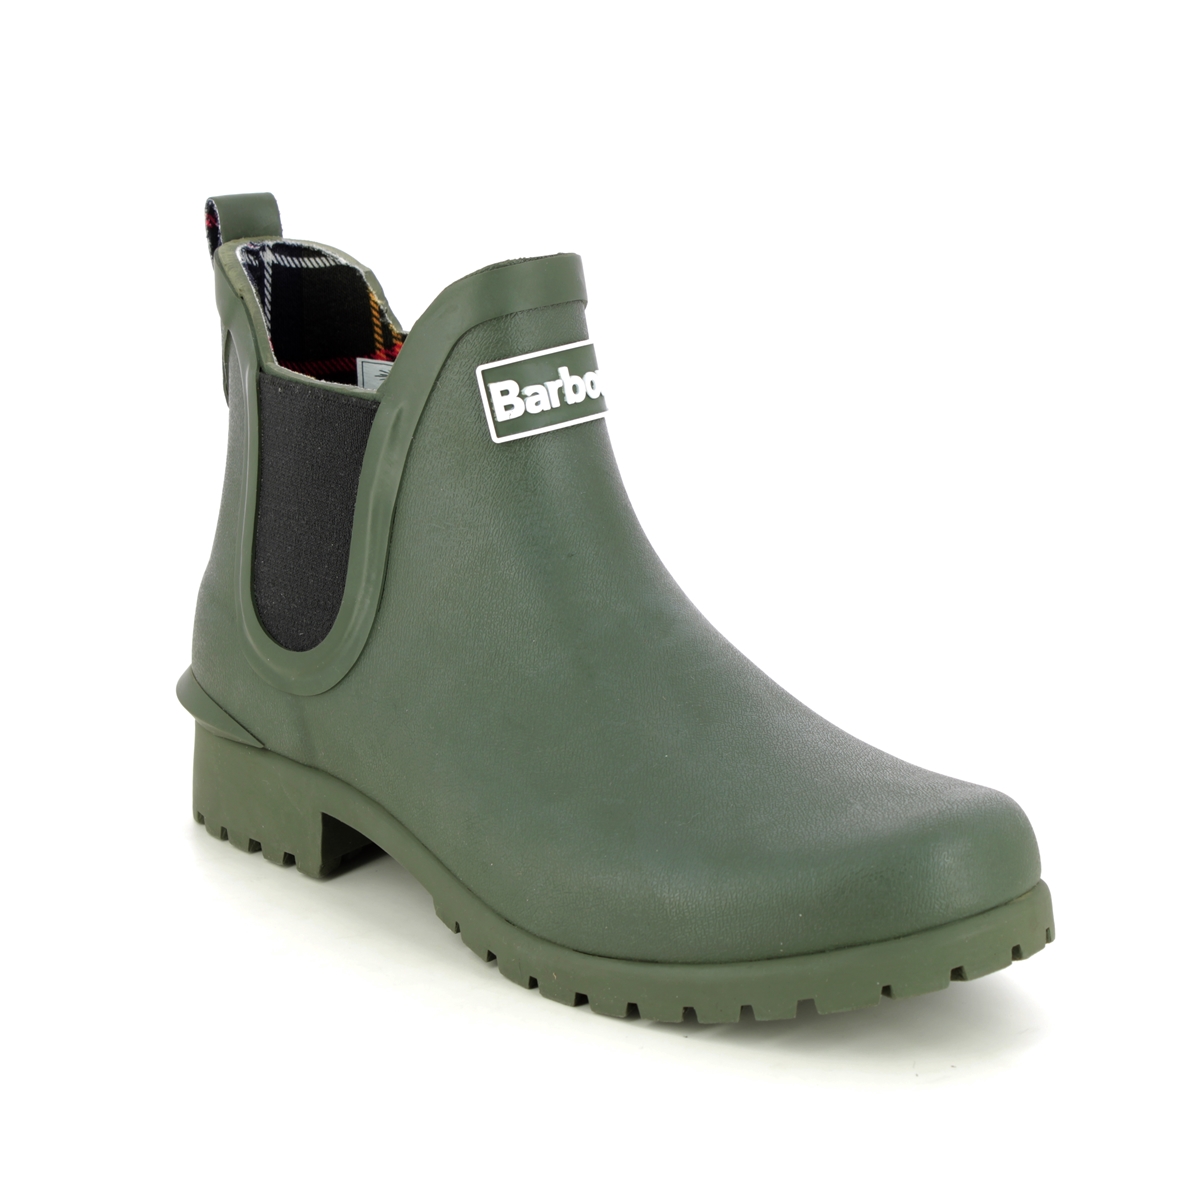 Barbour Wilton Wellie Olive Green Boots Lrf0066-Ol11 In Size 6 In Plain Olive Green